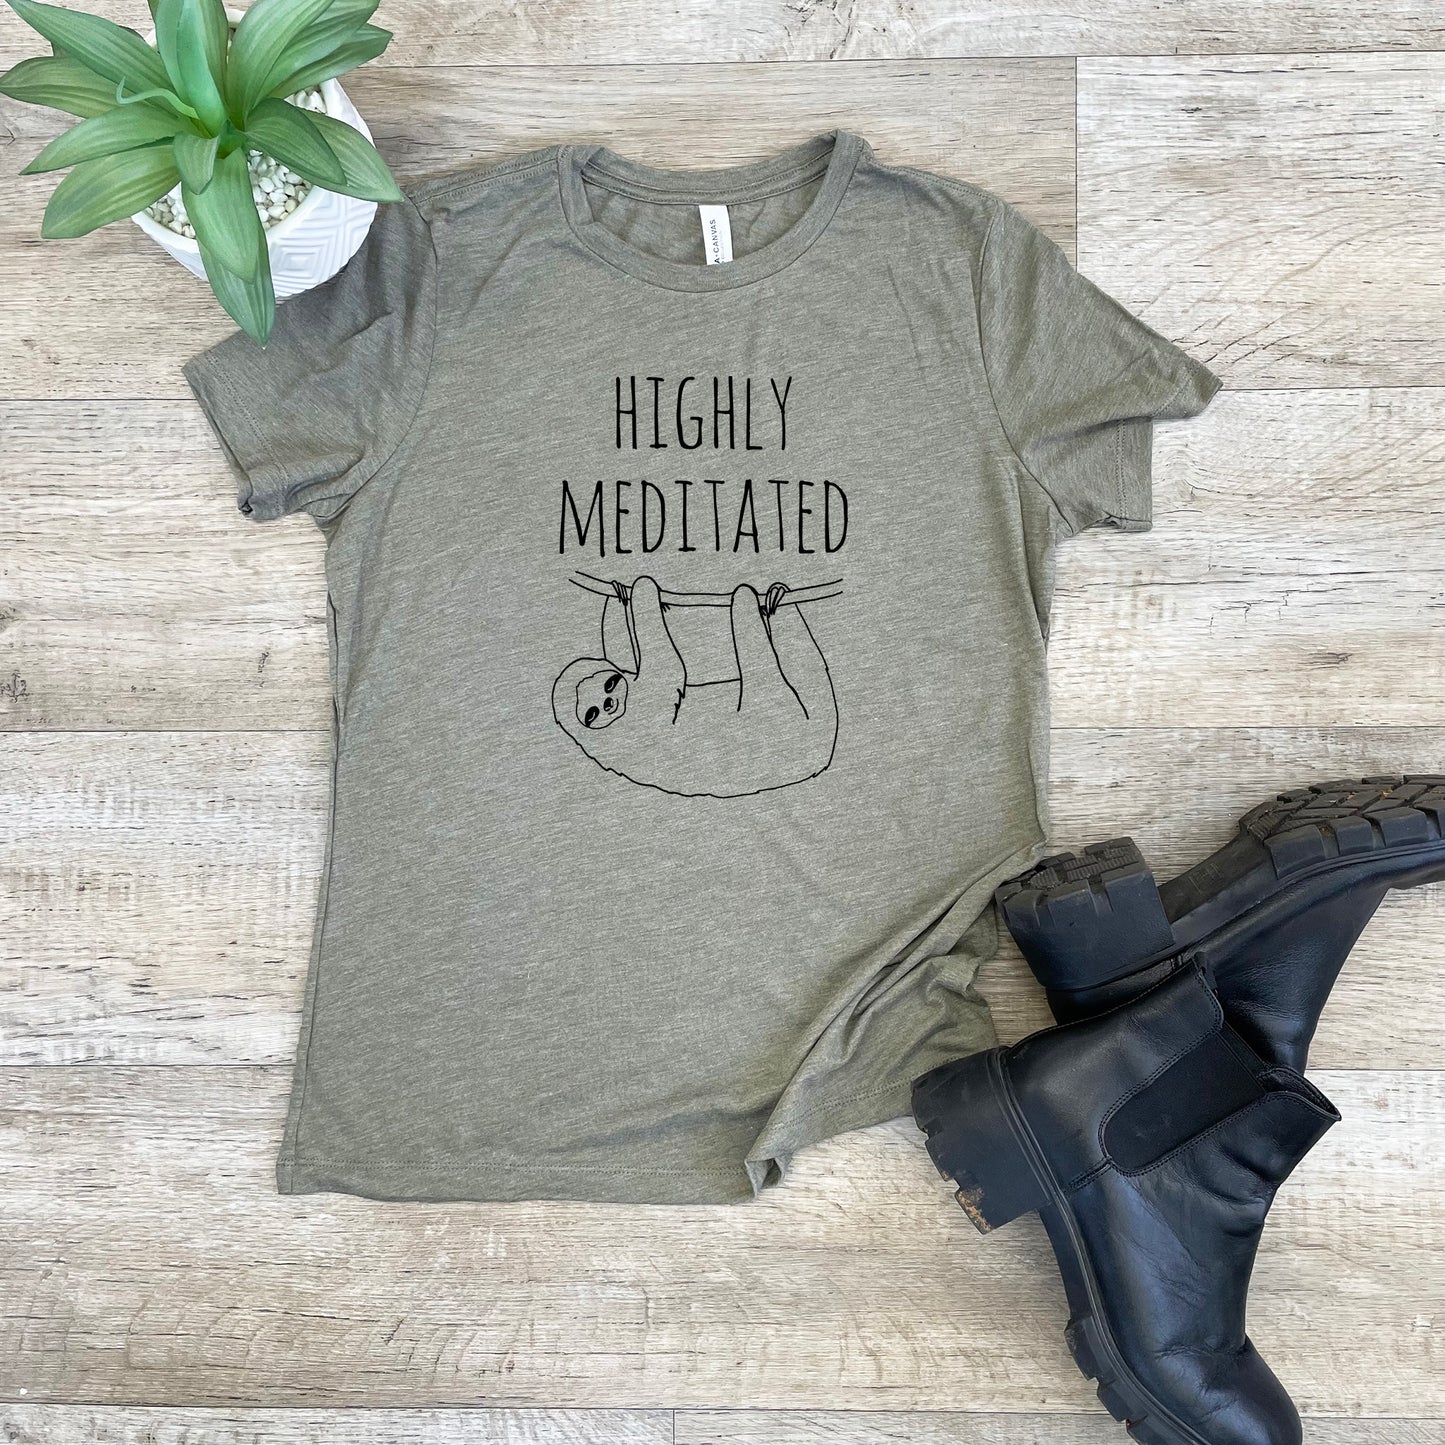 Highly Meditated (Sloth) - Women's Crew Tee - Olive or Dusty Blue